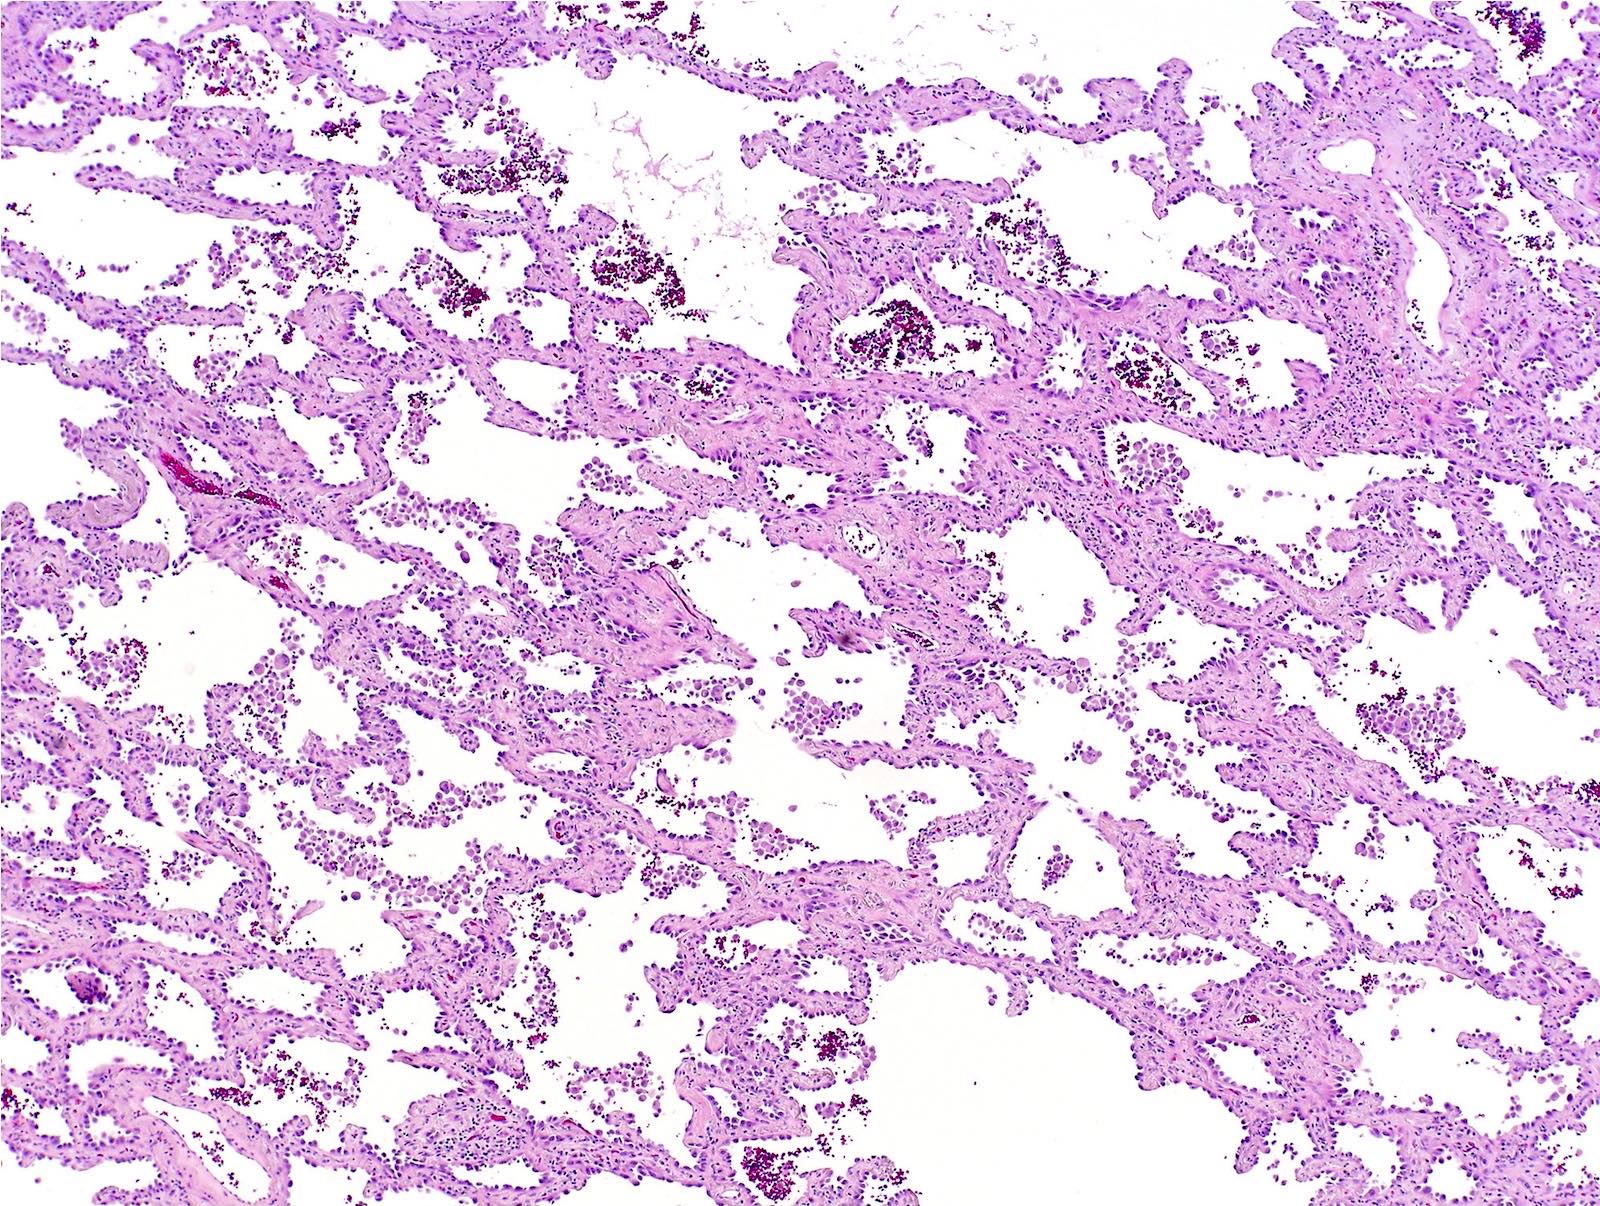 Pathology Outlines - Adenocarcinoma overview